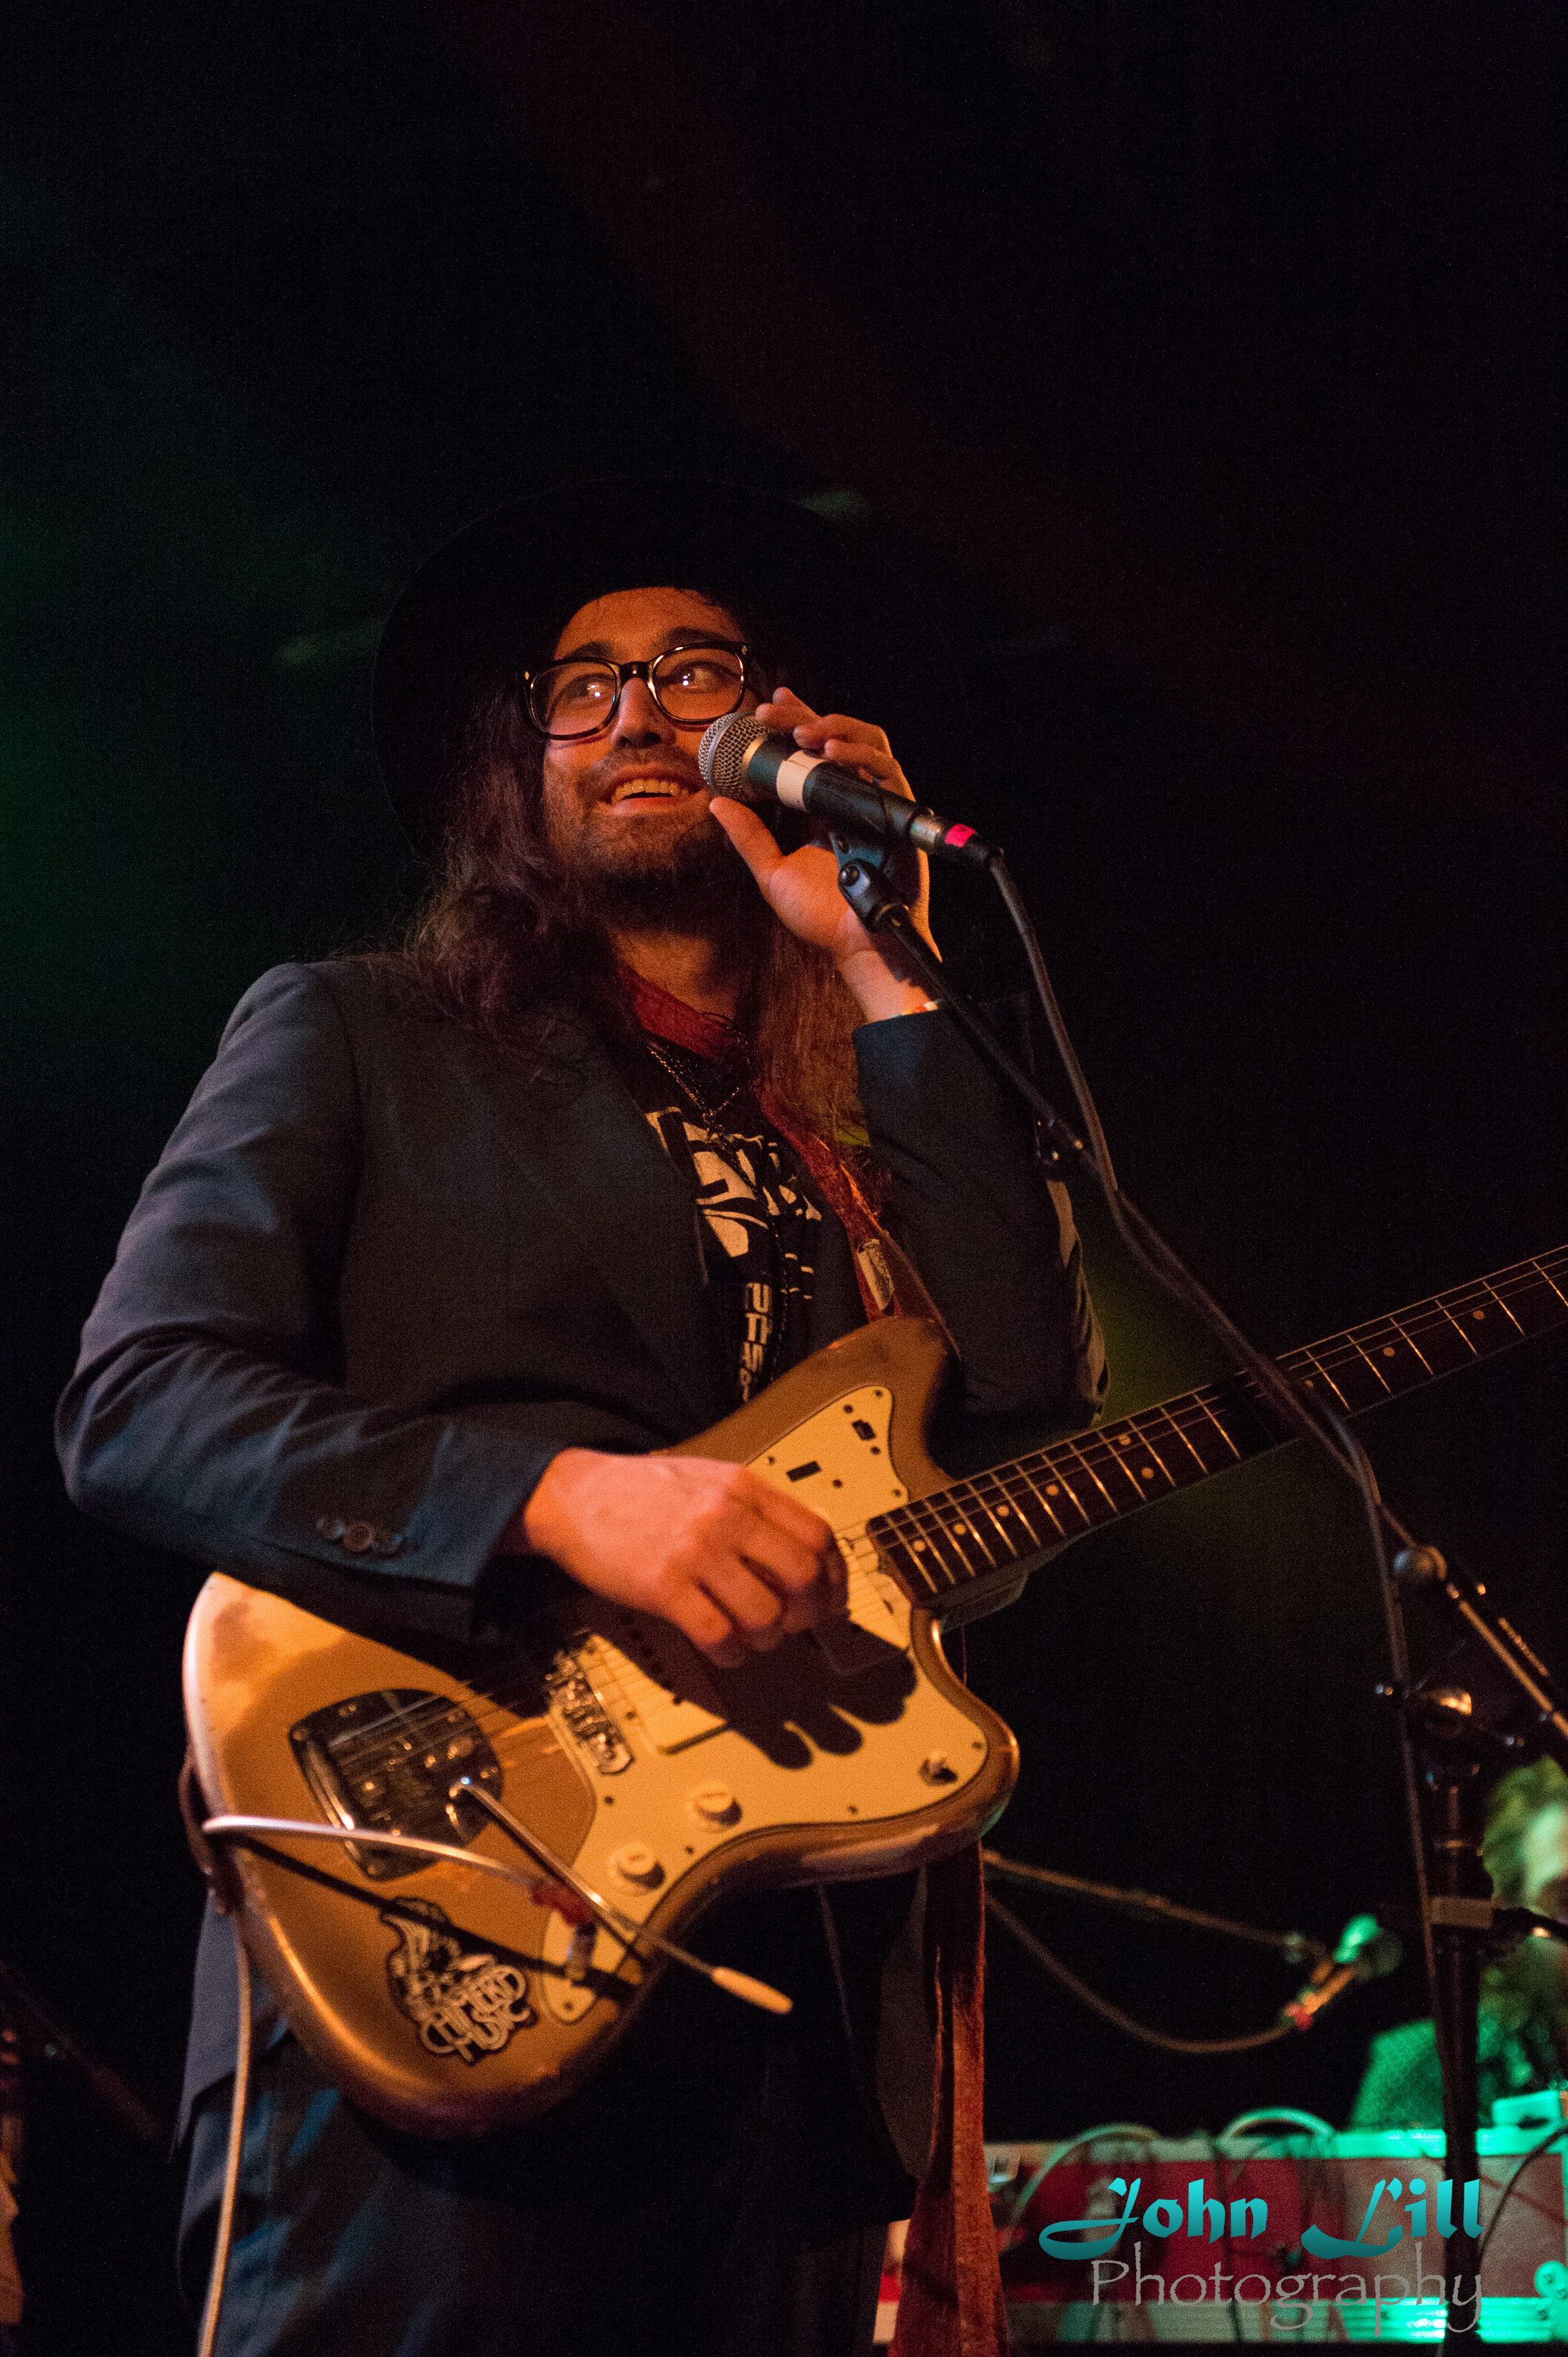 Sean Lennon – The Ghost of a Saber Tooth Tiger Live at The Crocodile (Photo by John Lill)